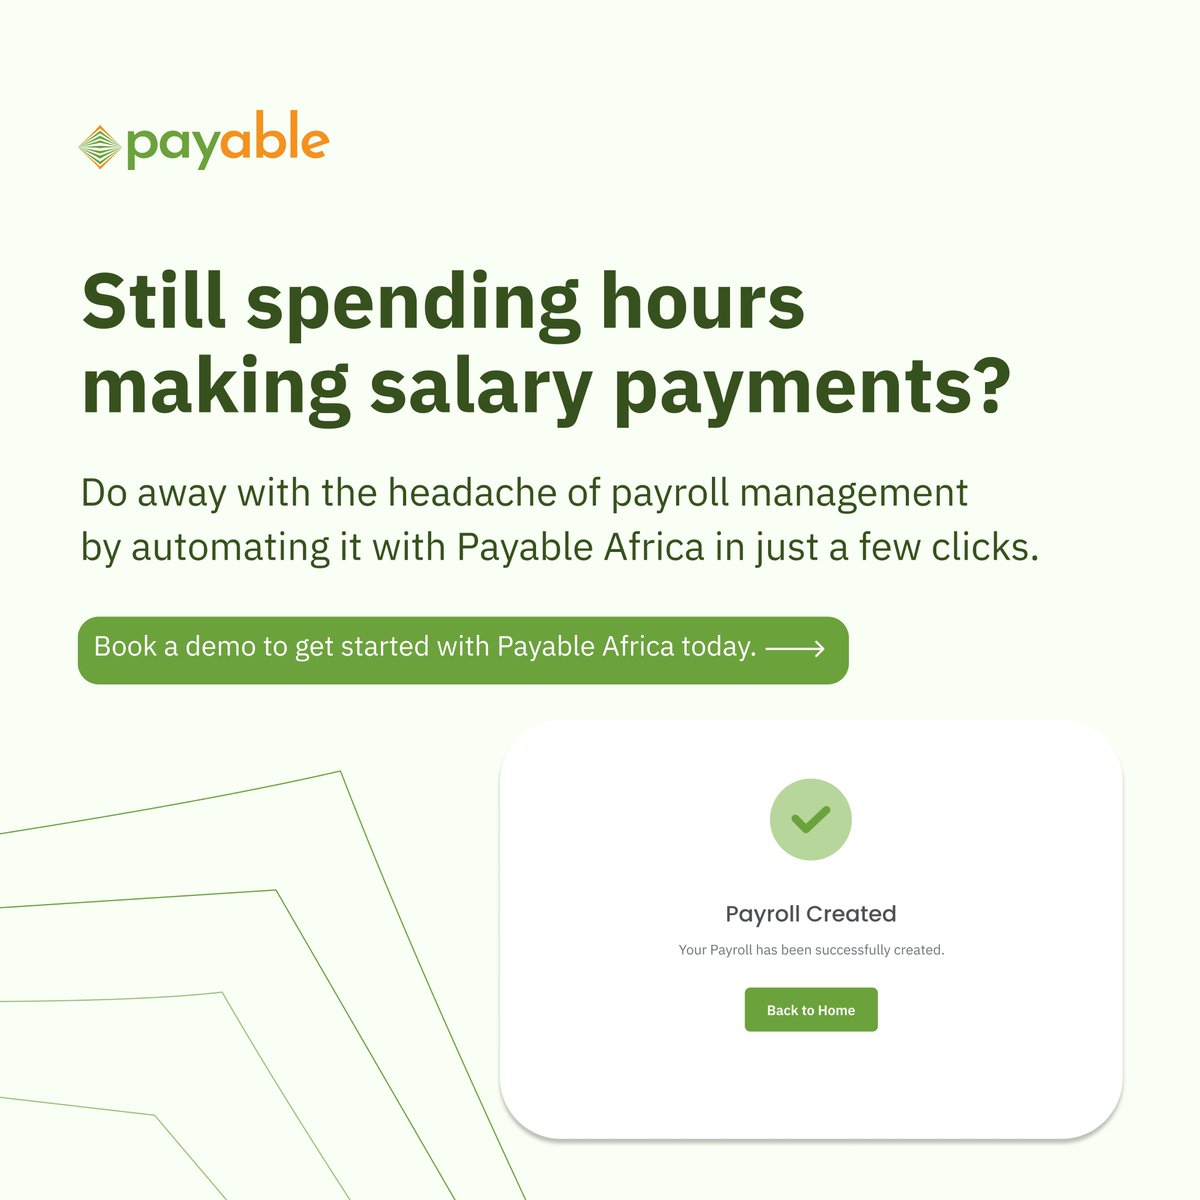 Automate your payroll today using Payable Africa's payroll management feature. 

Click the link in our bio or send us a DM to book a demo today.

#payableafrica
#paymentautomation
#payrollmanagement 
#business
#Nigeria